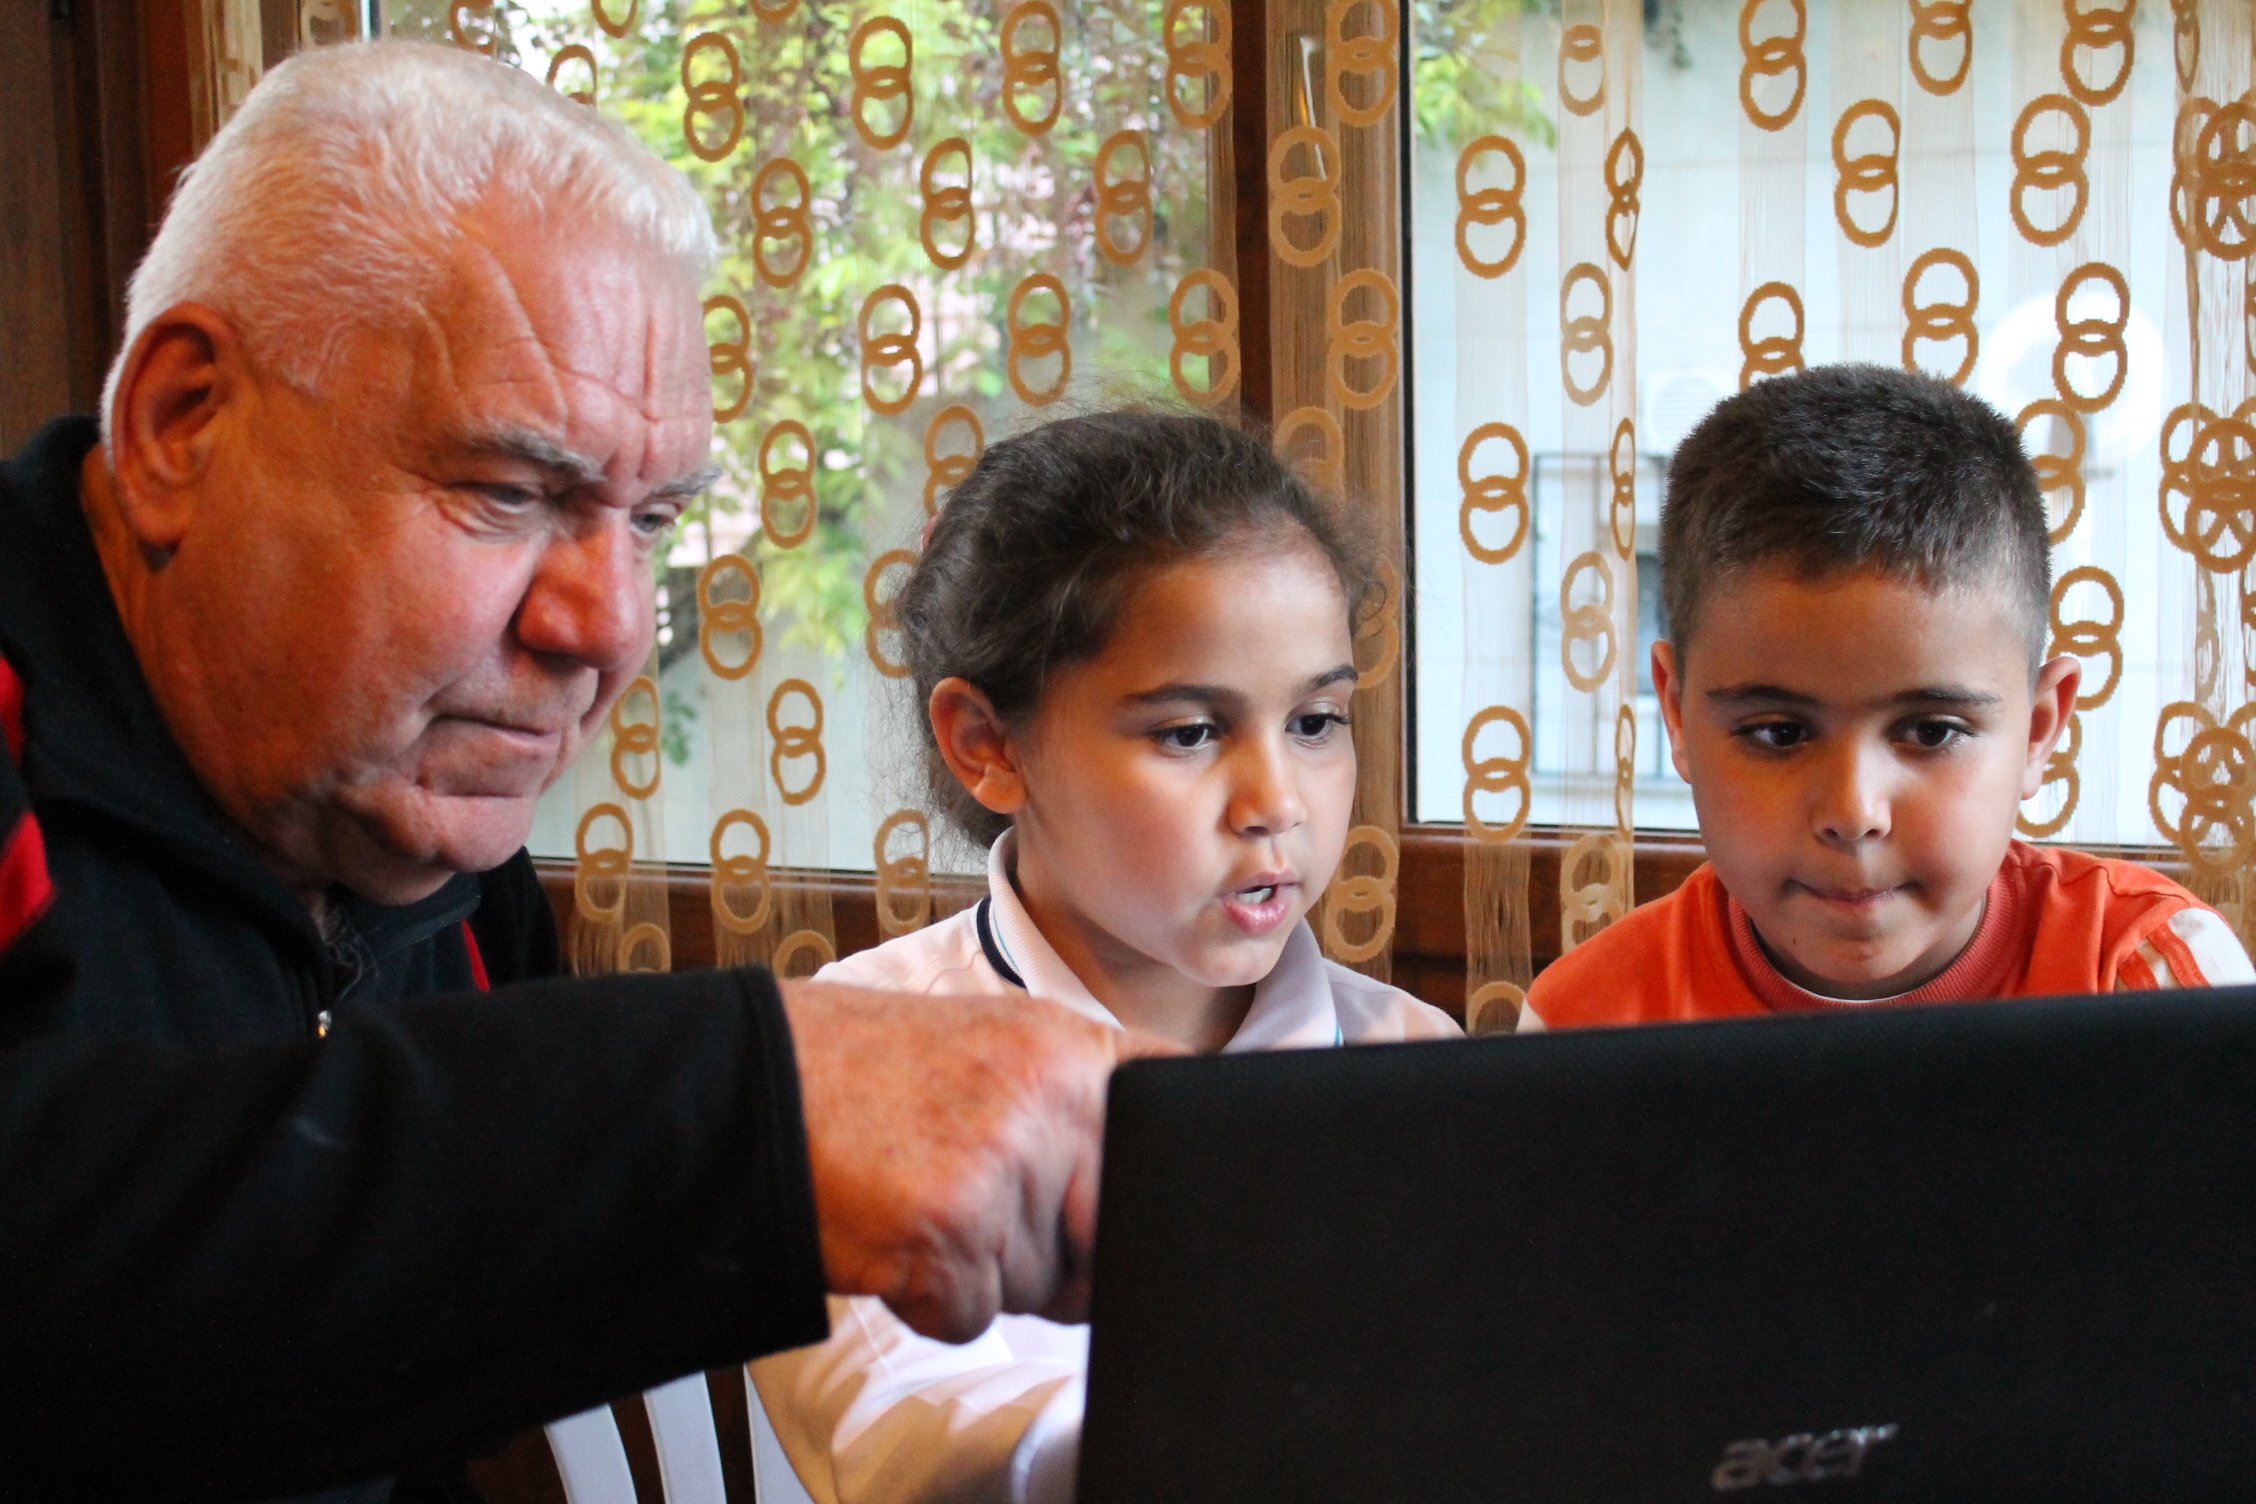 A grandfather with his grandchildren at a computer